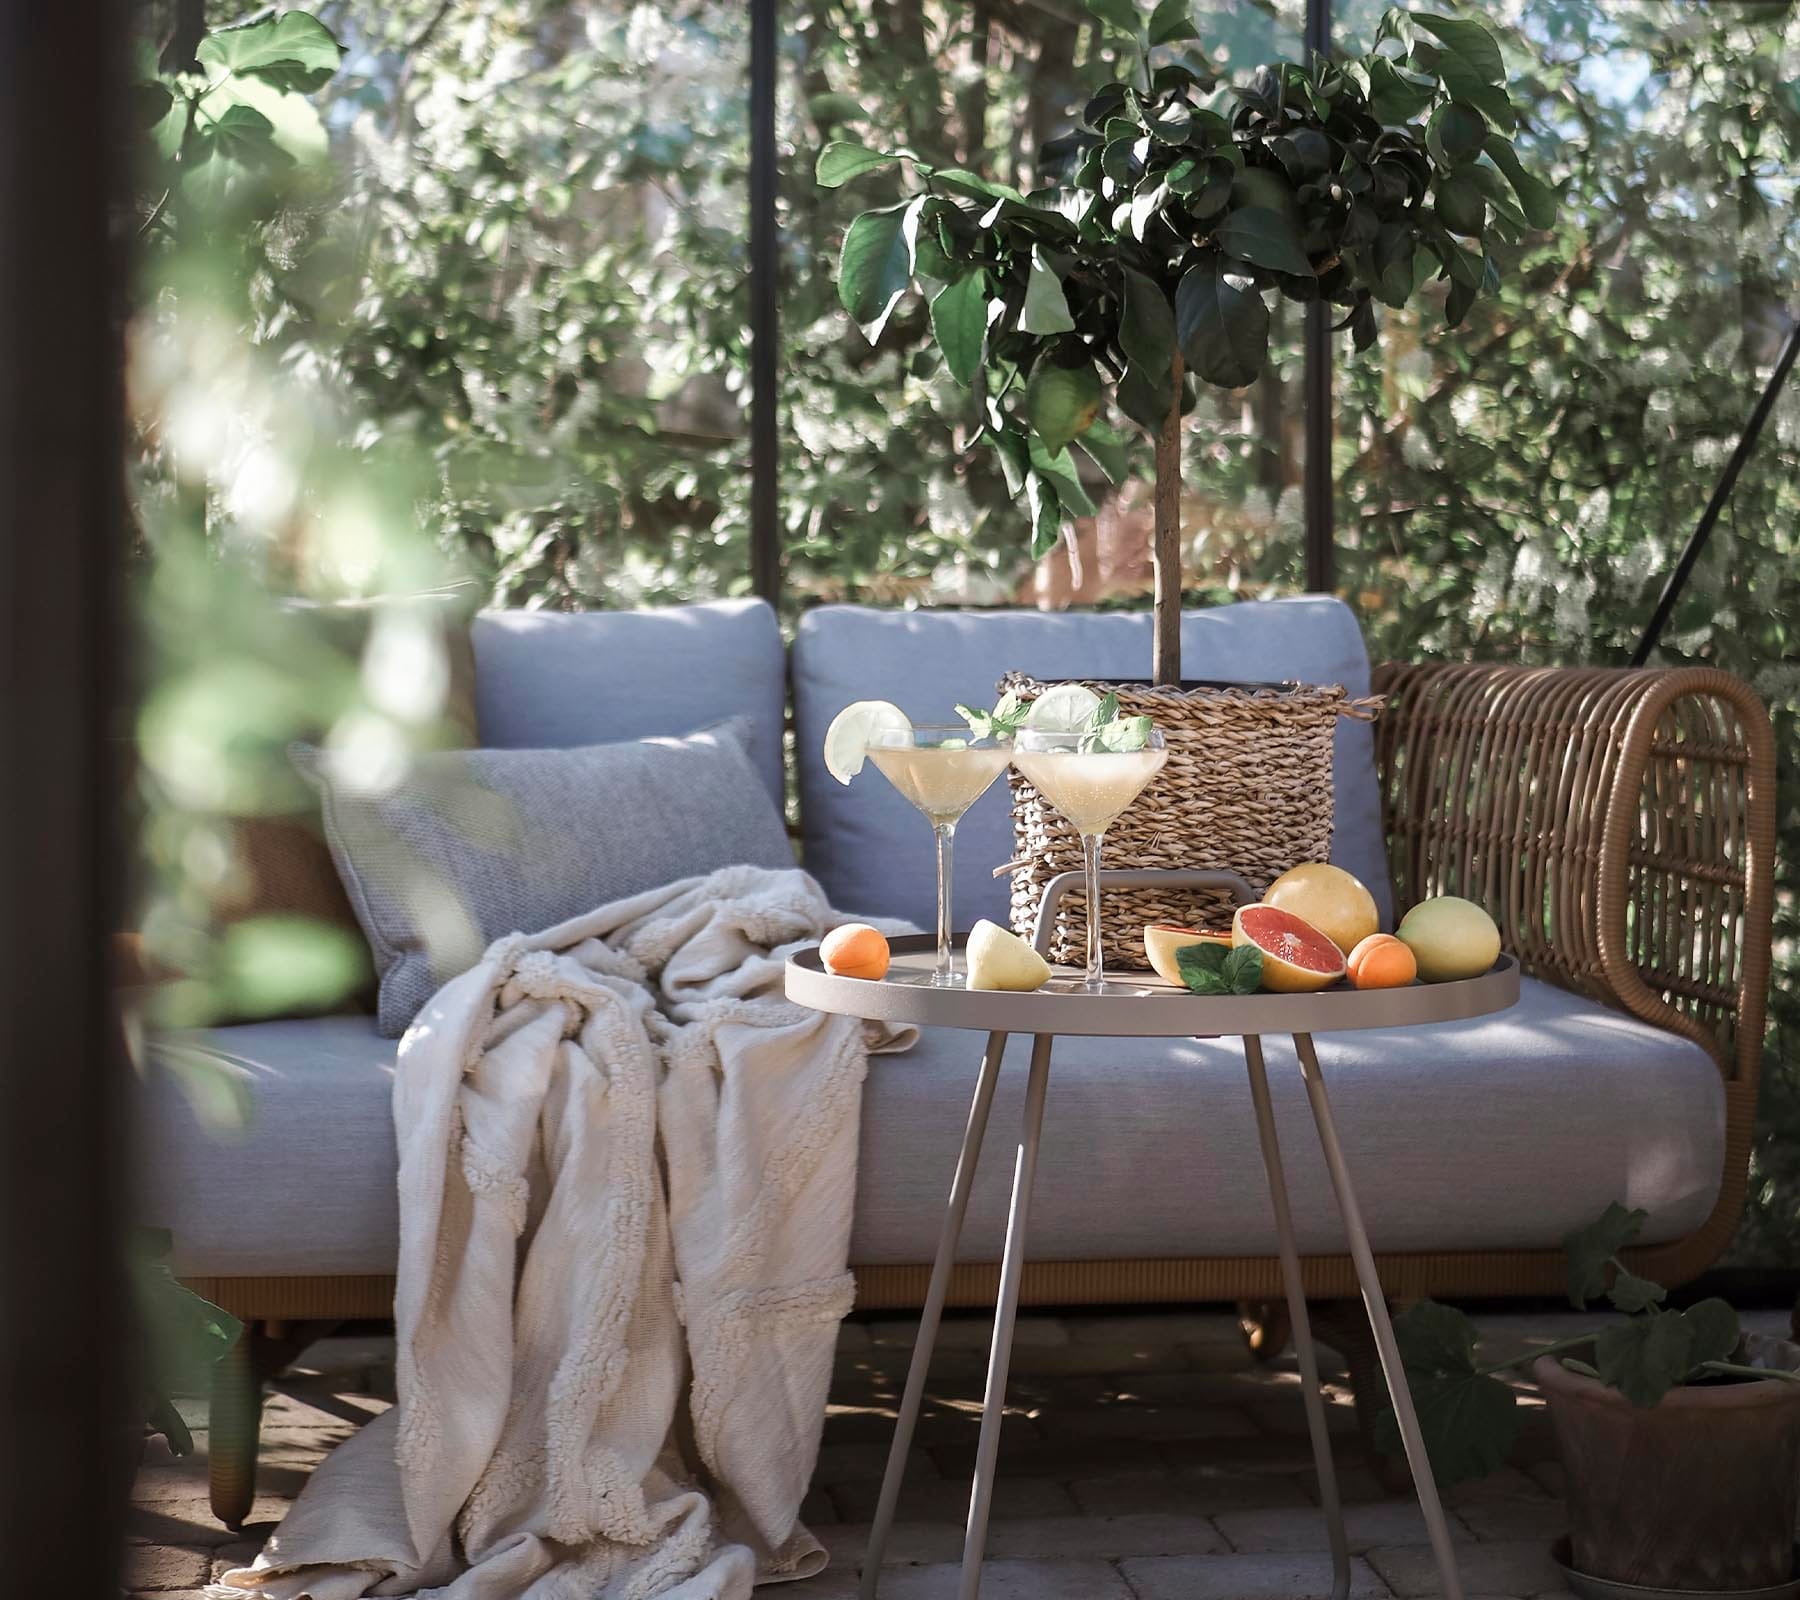 Boxhill's Nest 2-Seater Sofa lifestyle image at patio with small round table in front with fruits, cocktail and a plant on top